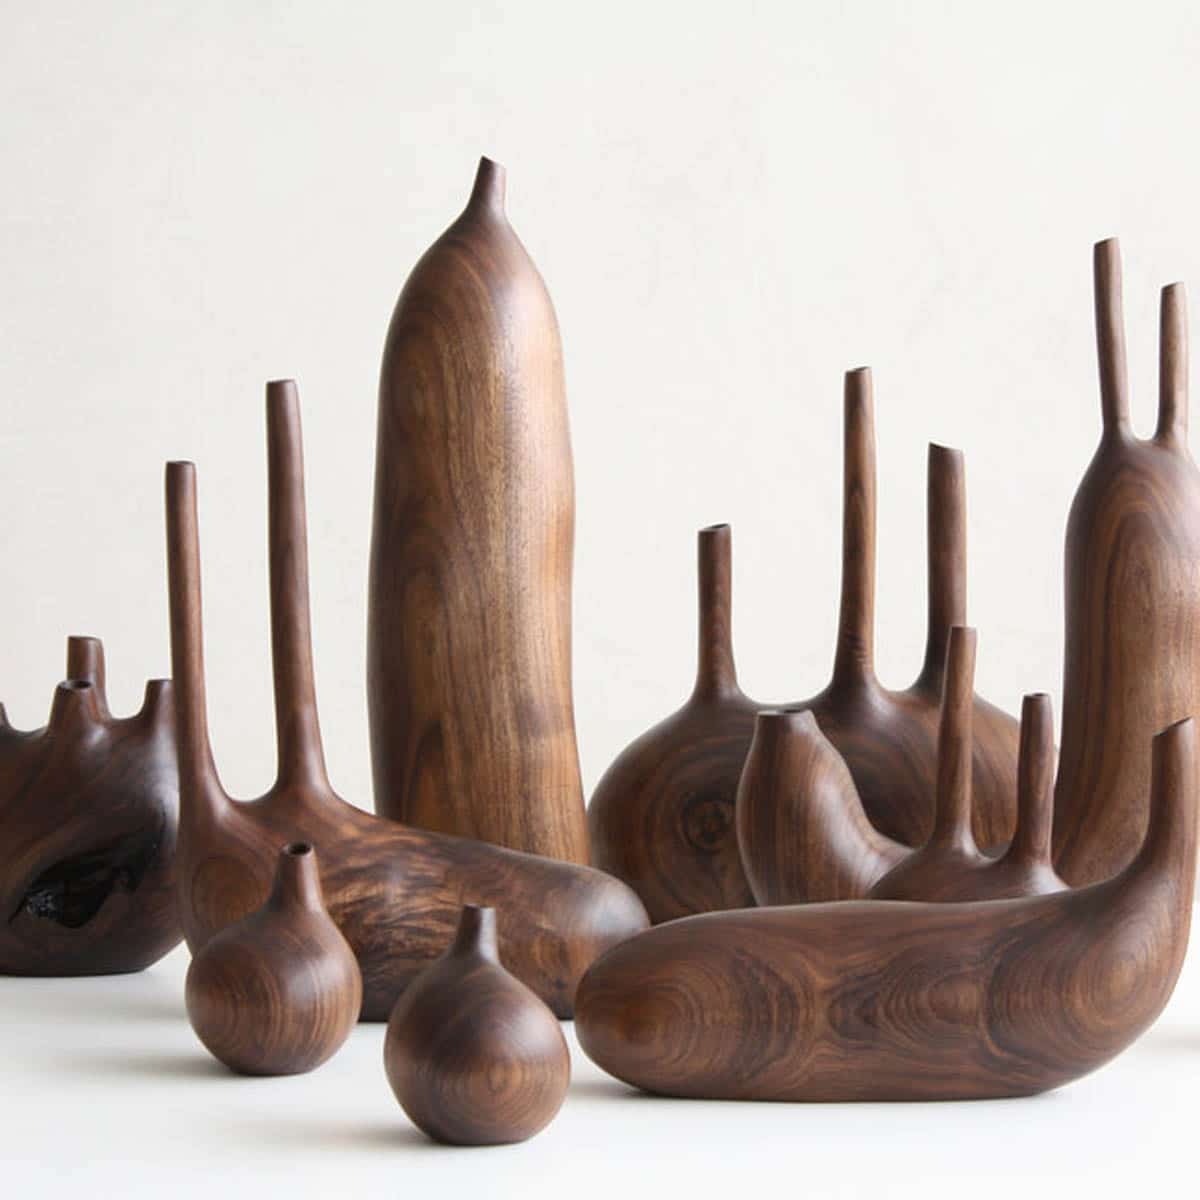 twig-vases-by-woodworker-julian-watts-featured